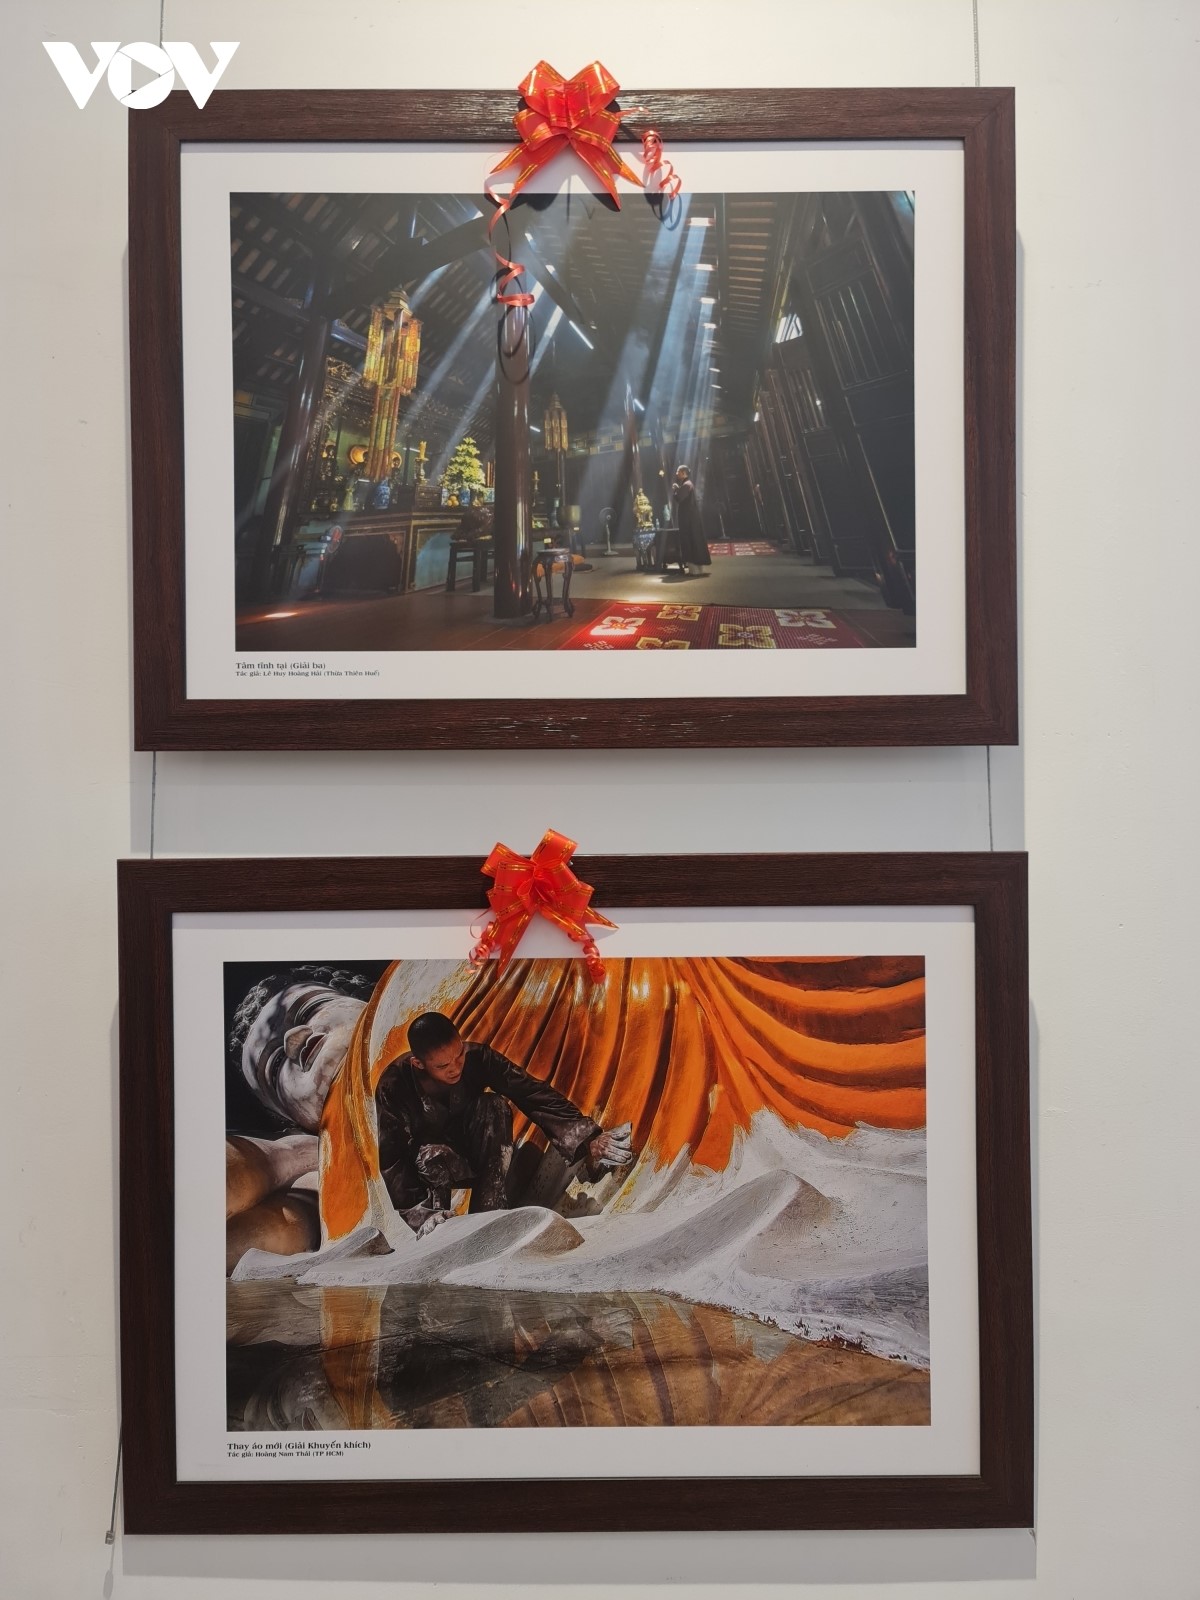 here are some of the winning photos which are showcased at the exhibition.